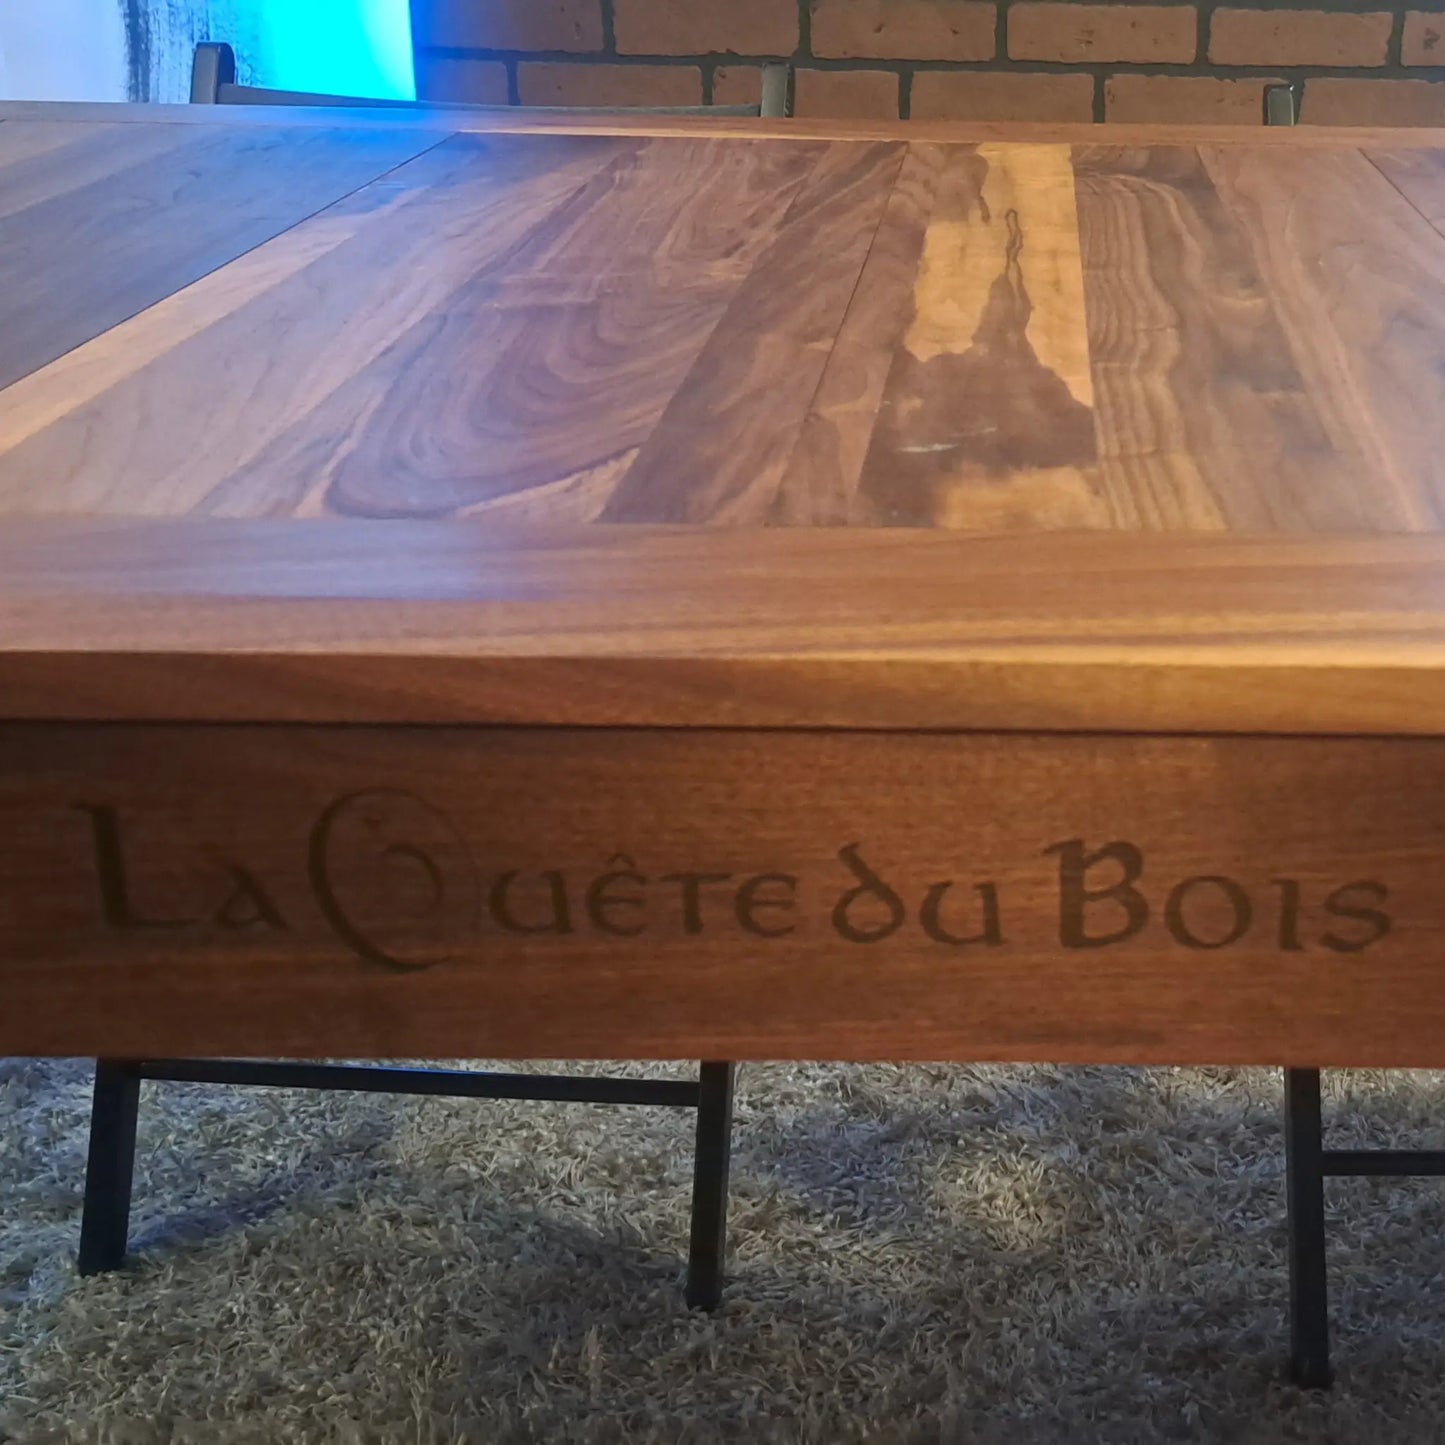 Adventure Gaming Table